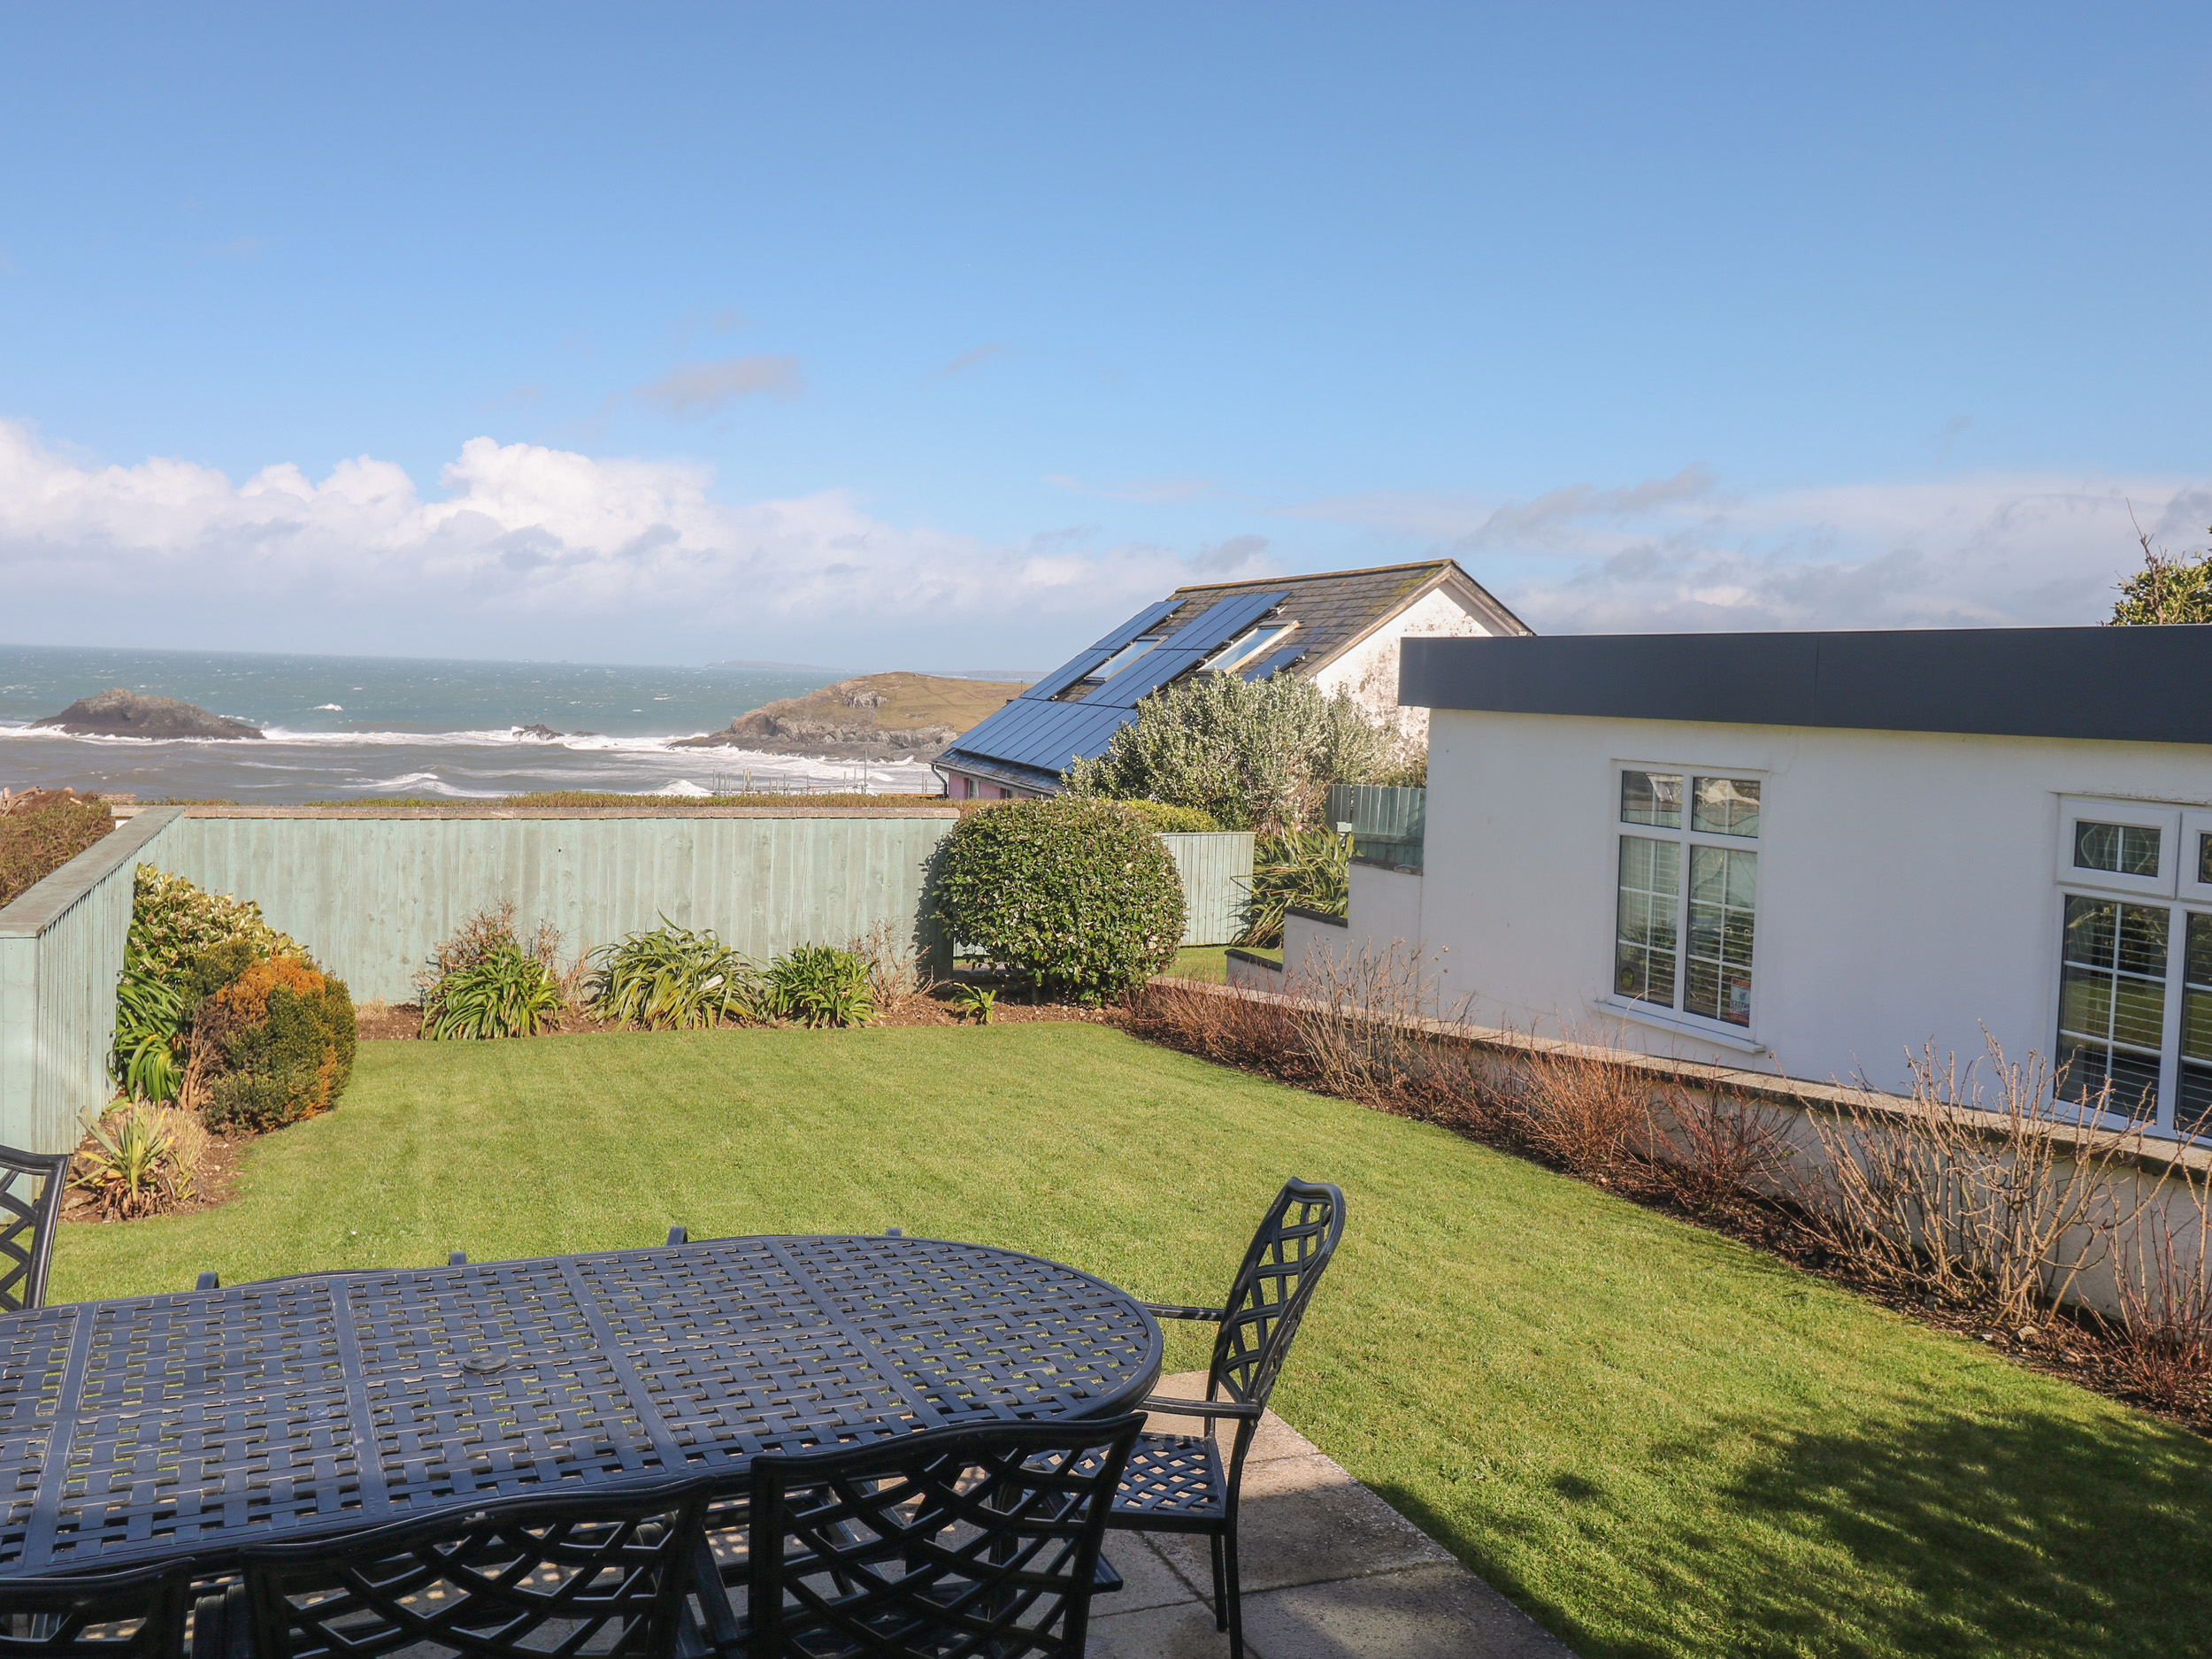 4 bedroom Cottage for rent in Newquay, Cornwall